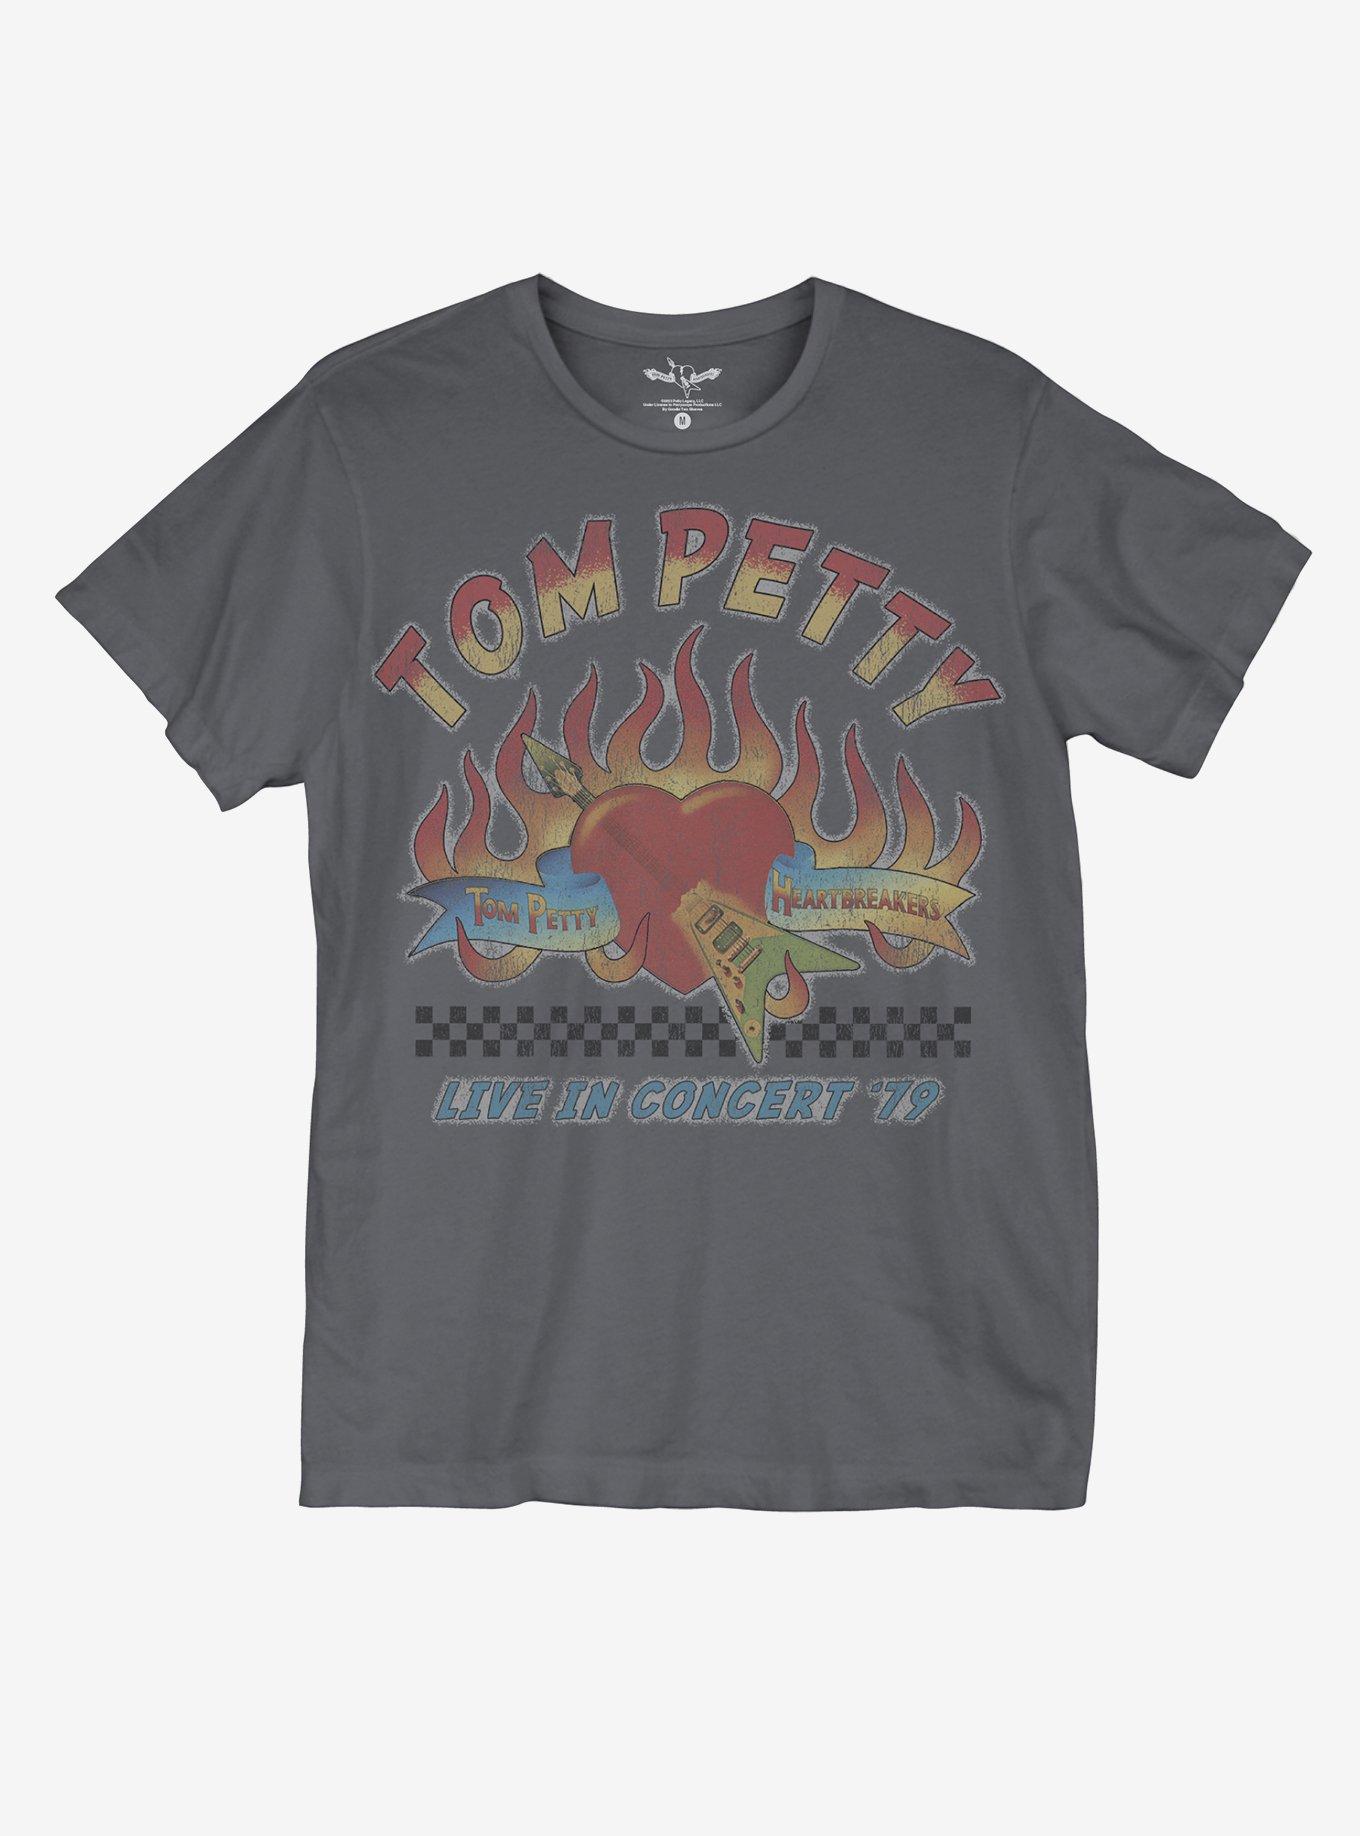 Tom Petty & The Heartbreakers Live in 1979 Boyfriend Fit Girls T-Shirt, CHARCOAL  GREY, hi-res